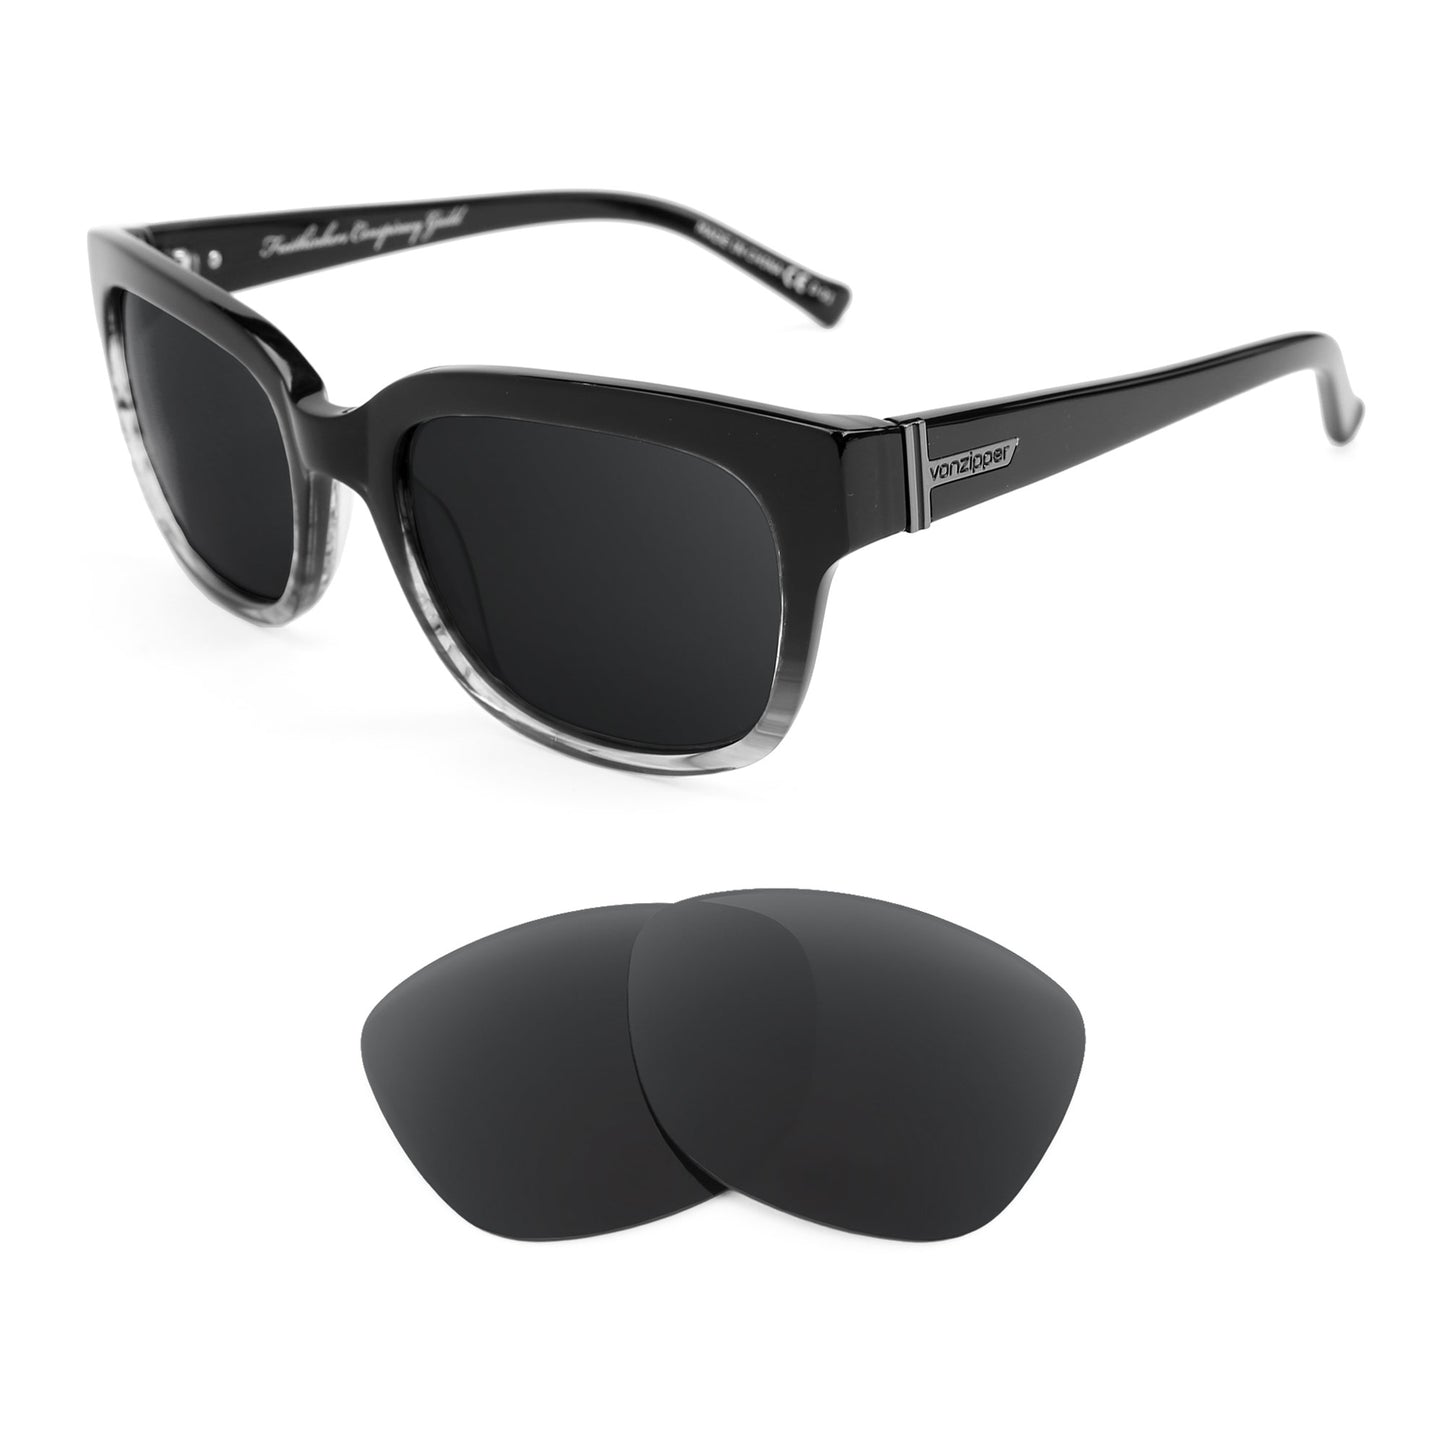 VonZipper Commonwealth sunglasses with replacement lenses